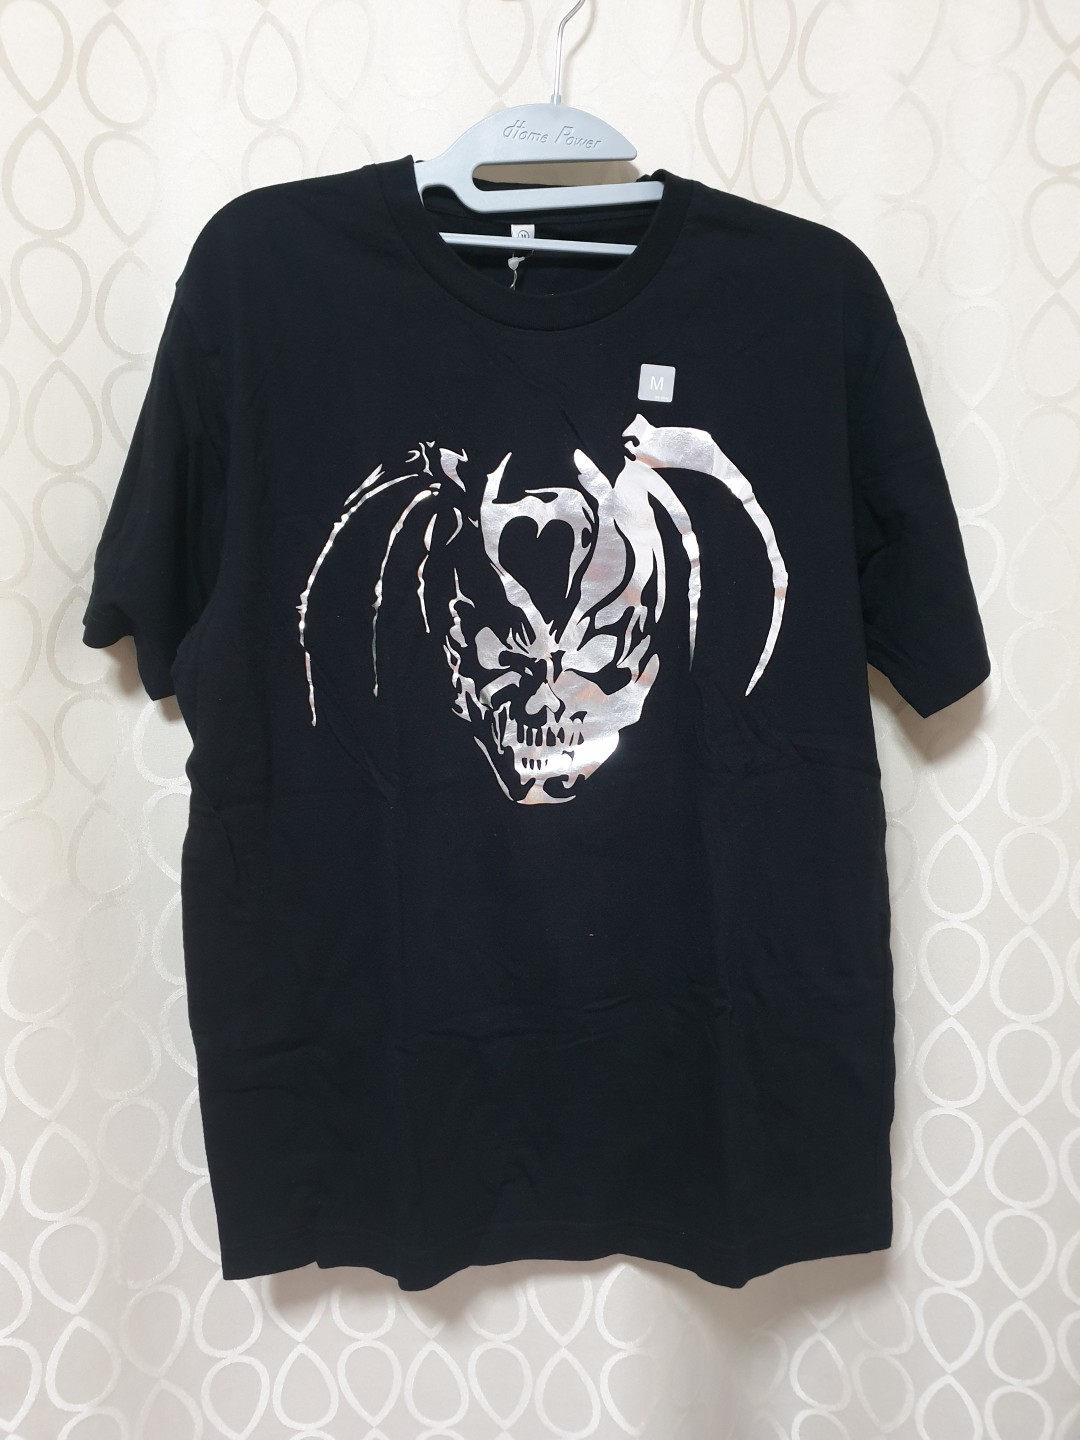 Uniqlo Black Graphic Tee Men S Fashion Clothes Tops On Carousell